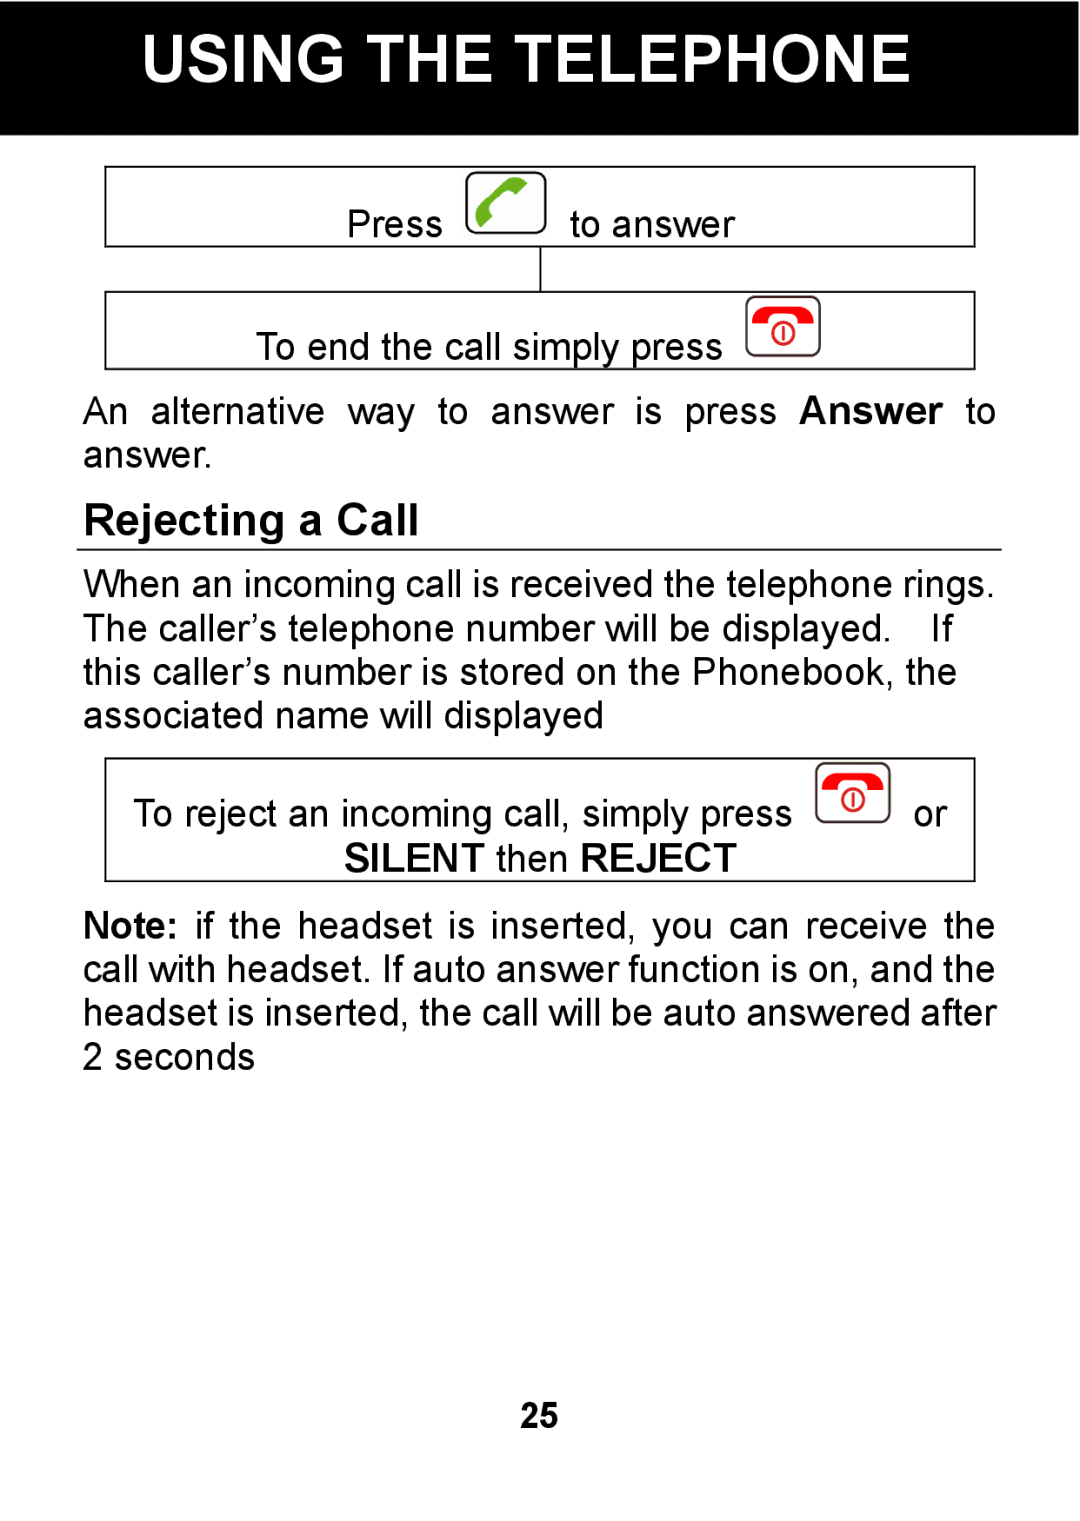 Pal/Pax PAL101 manual Rejecting a Call, Silent then Reject 